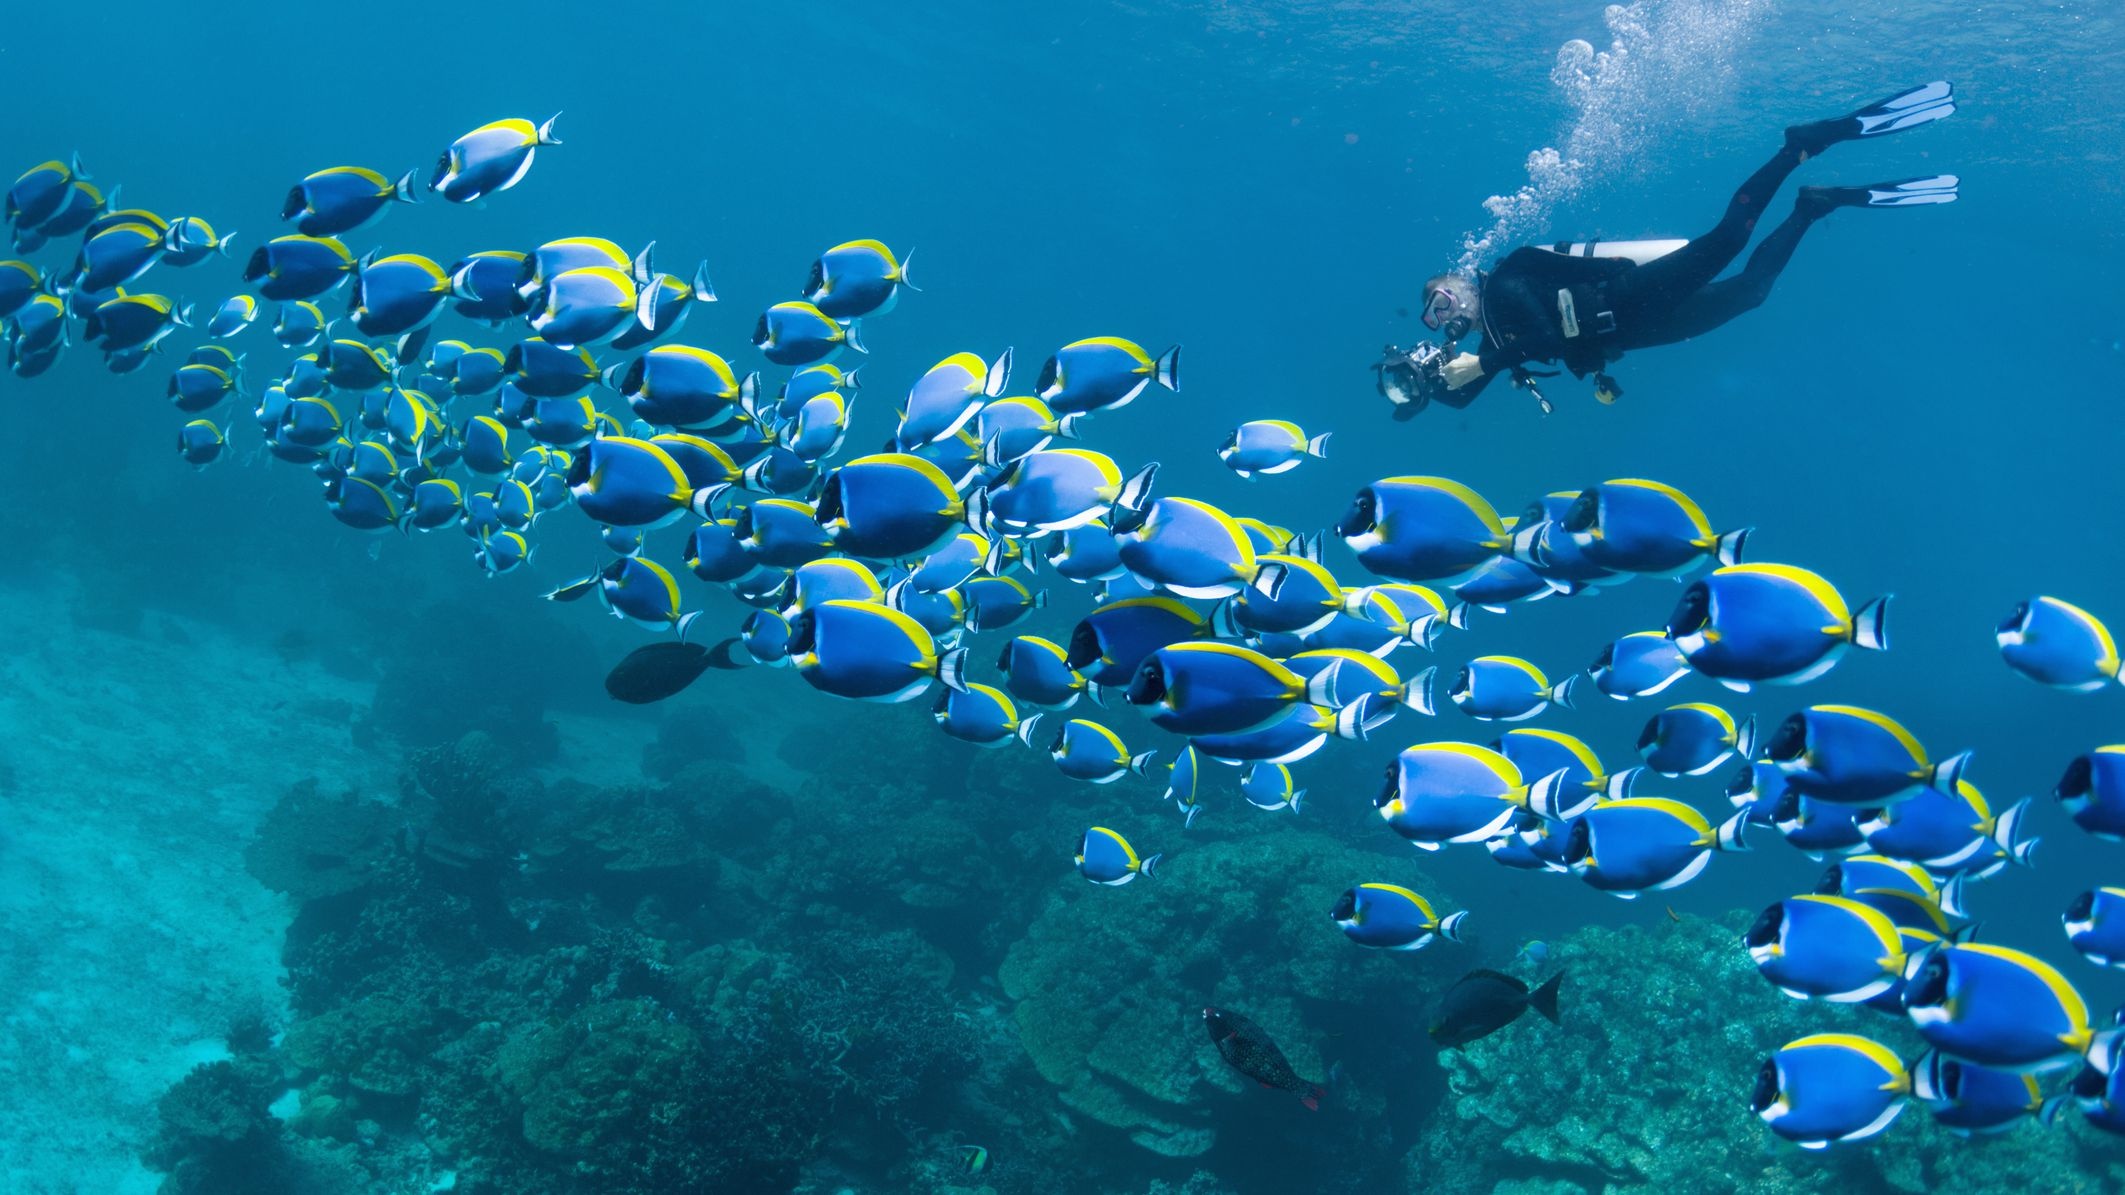 Scuba Diving: Exploring the amazing life of sea fish in the Red Sea, Hurghada, Egypt. 2130x1200 HD Wallpaper.